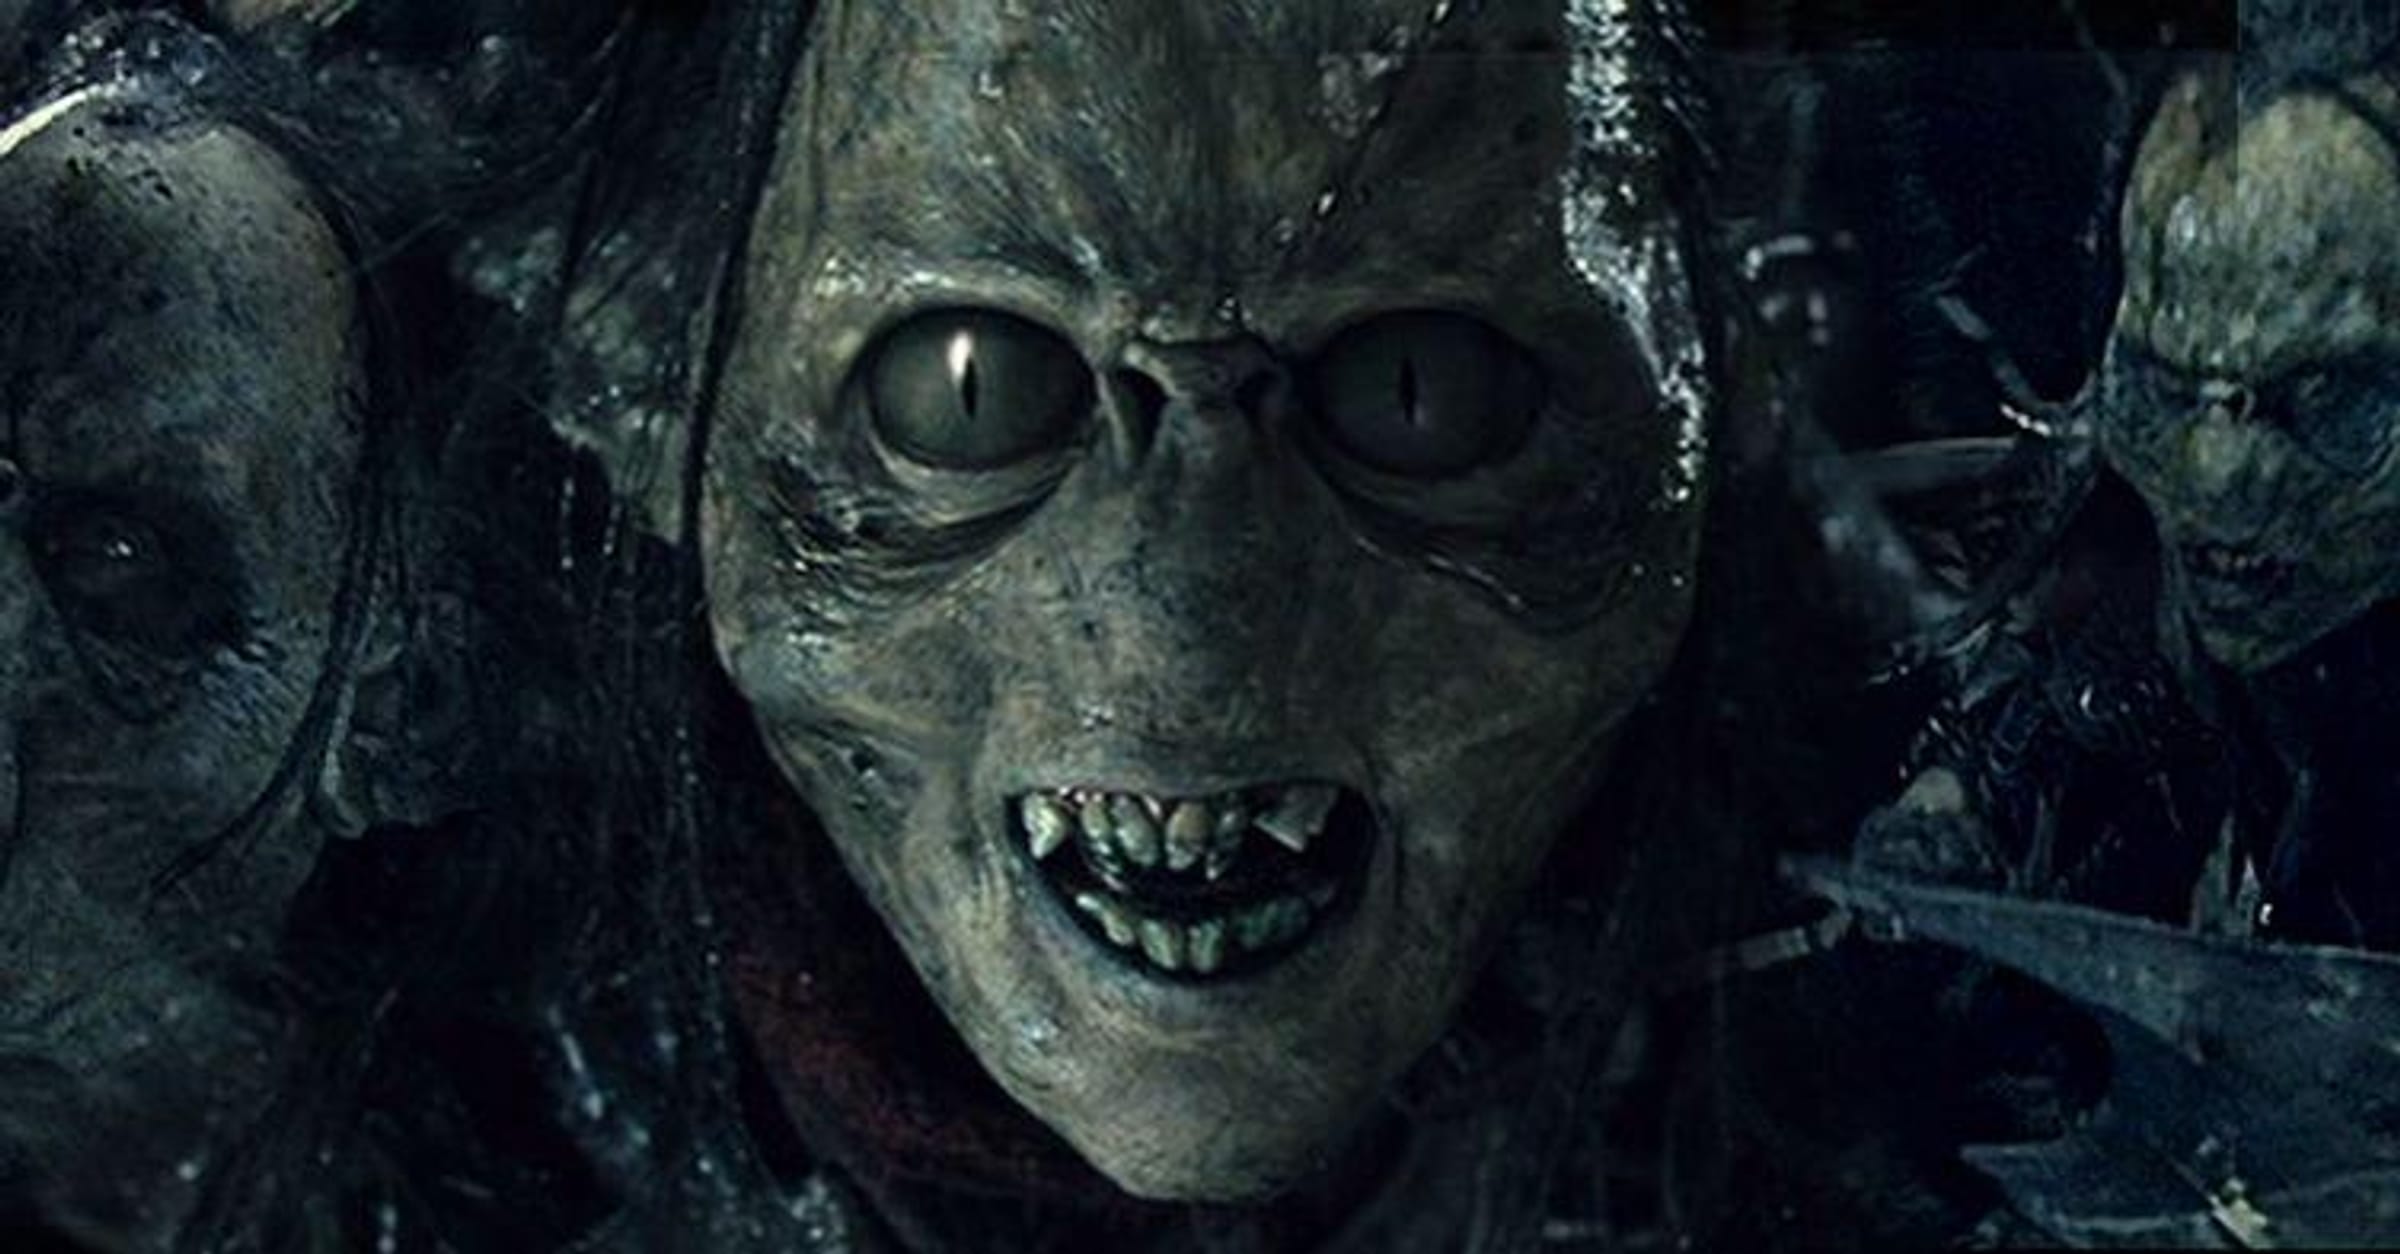 Lord of the Rings game gives Gollum more hair so he's less creepy